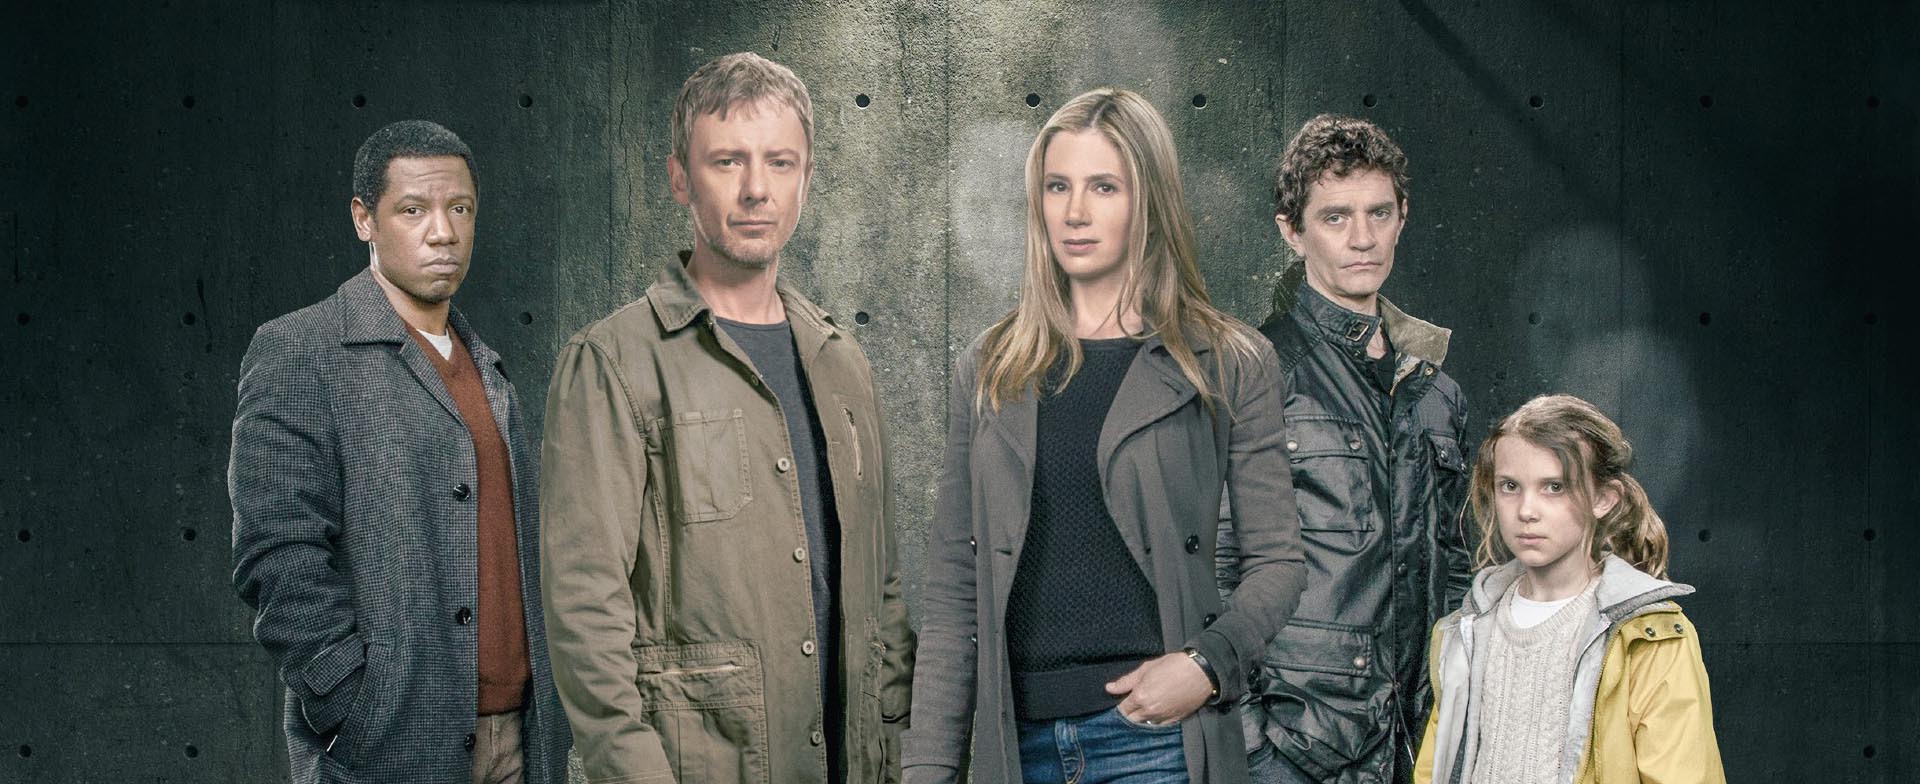 Where to watch Intruders TV series streaming online?